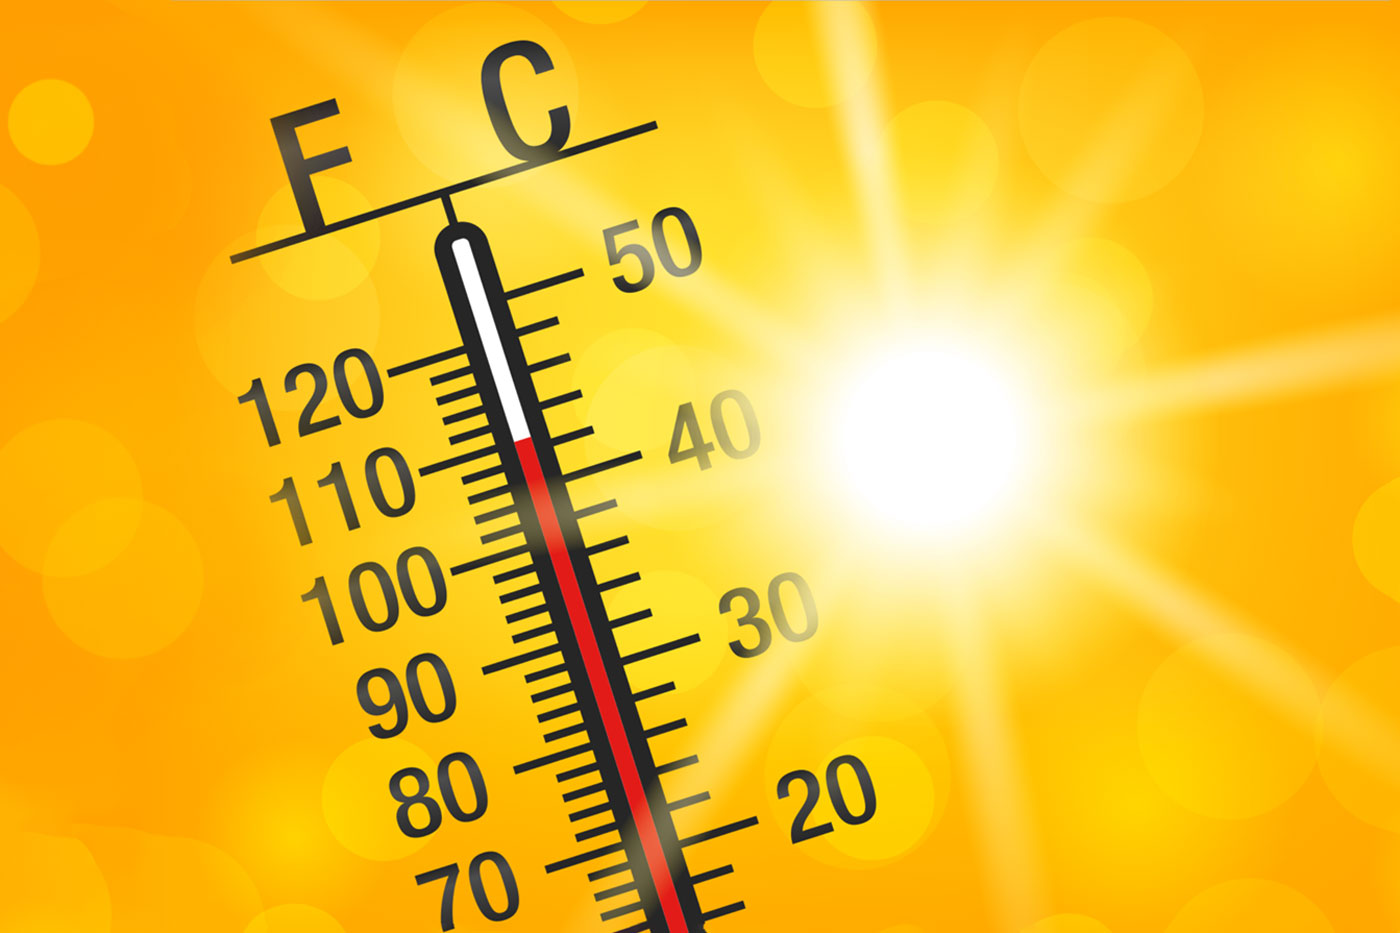 Heat-related information from MU Extension